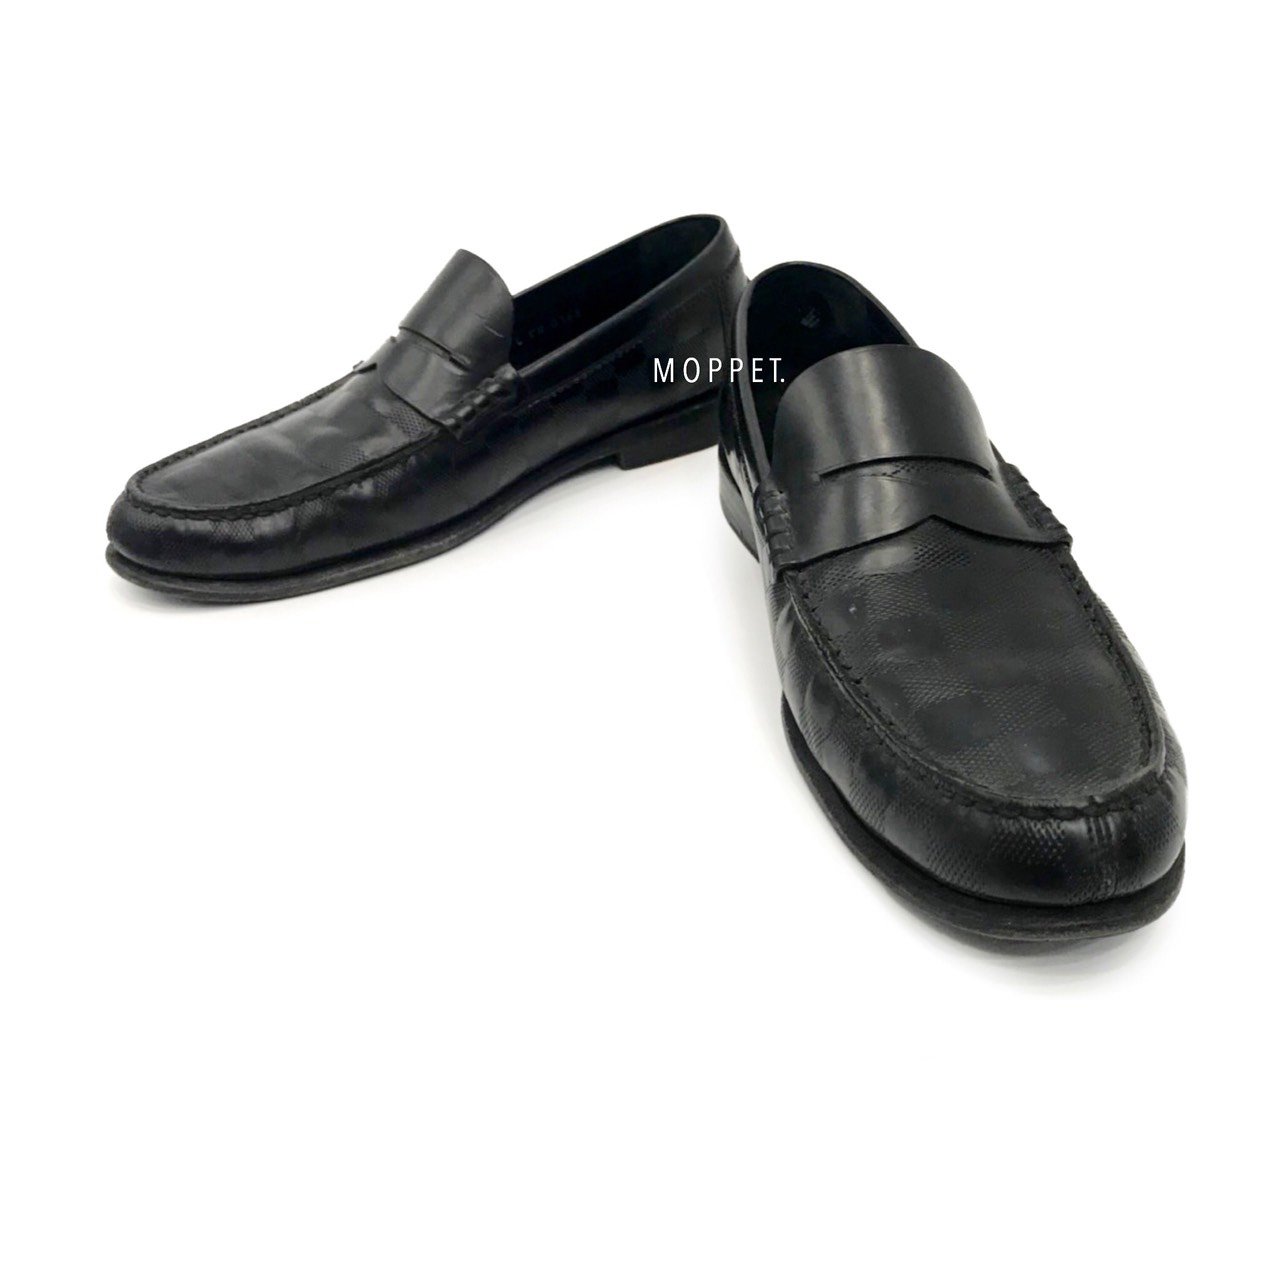 Used LV Men's Loafers Size 6" in Black Leather